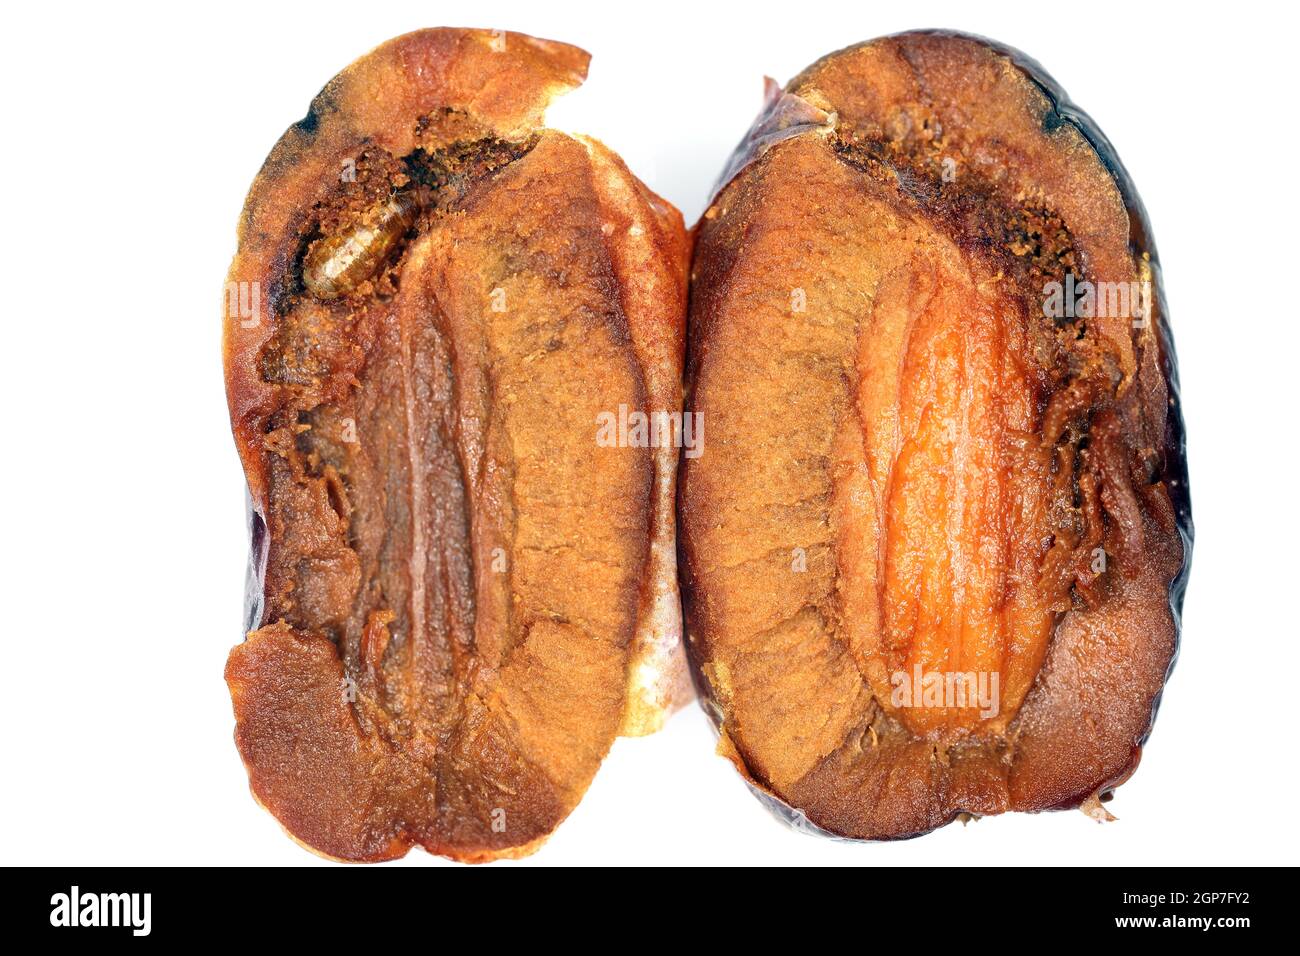 Olive fruit damaged by Olive Fruit fly- Bactrocera oleae (pupa inside). One of the most important olive pests. Stock Photo